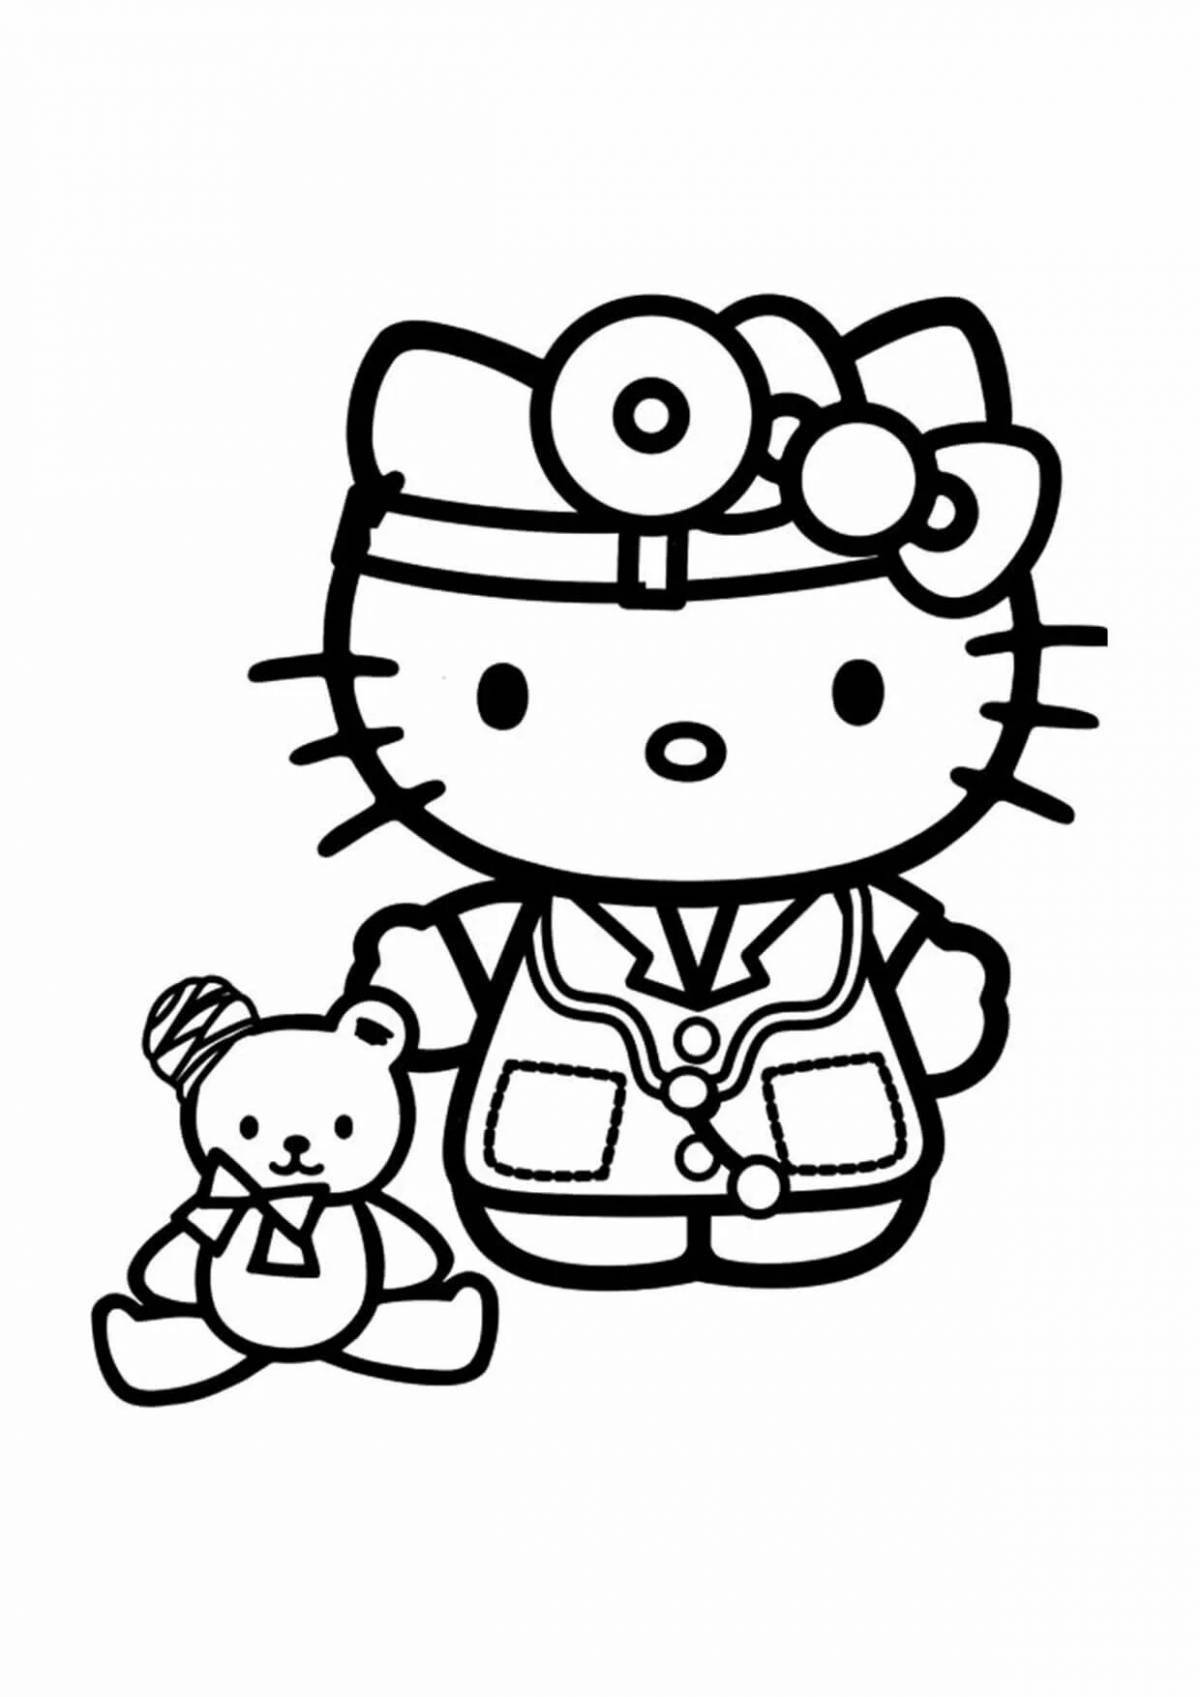 Joyful coloring of my lady from hello kitty